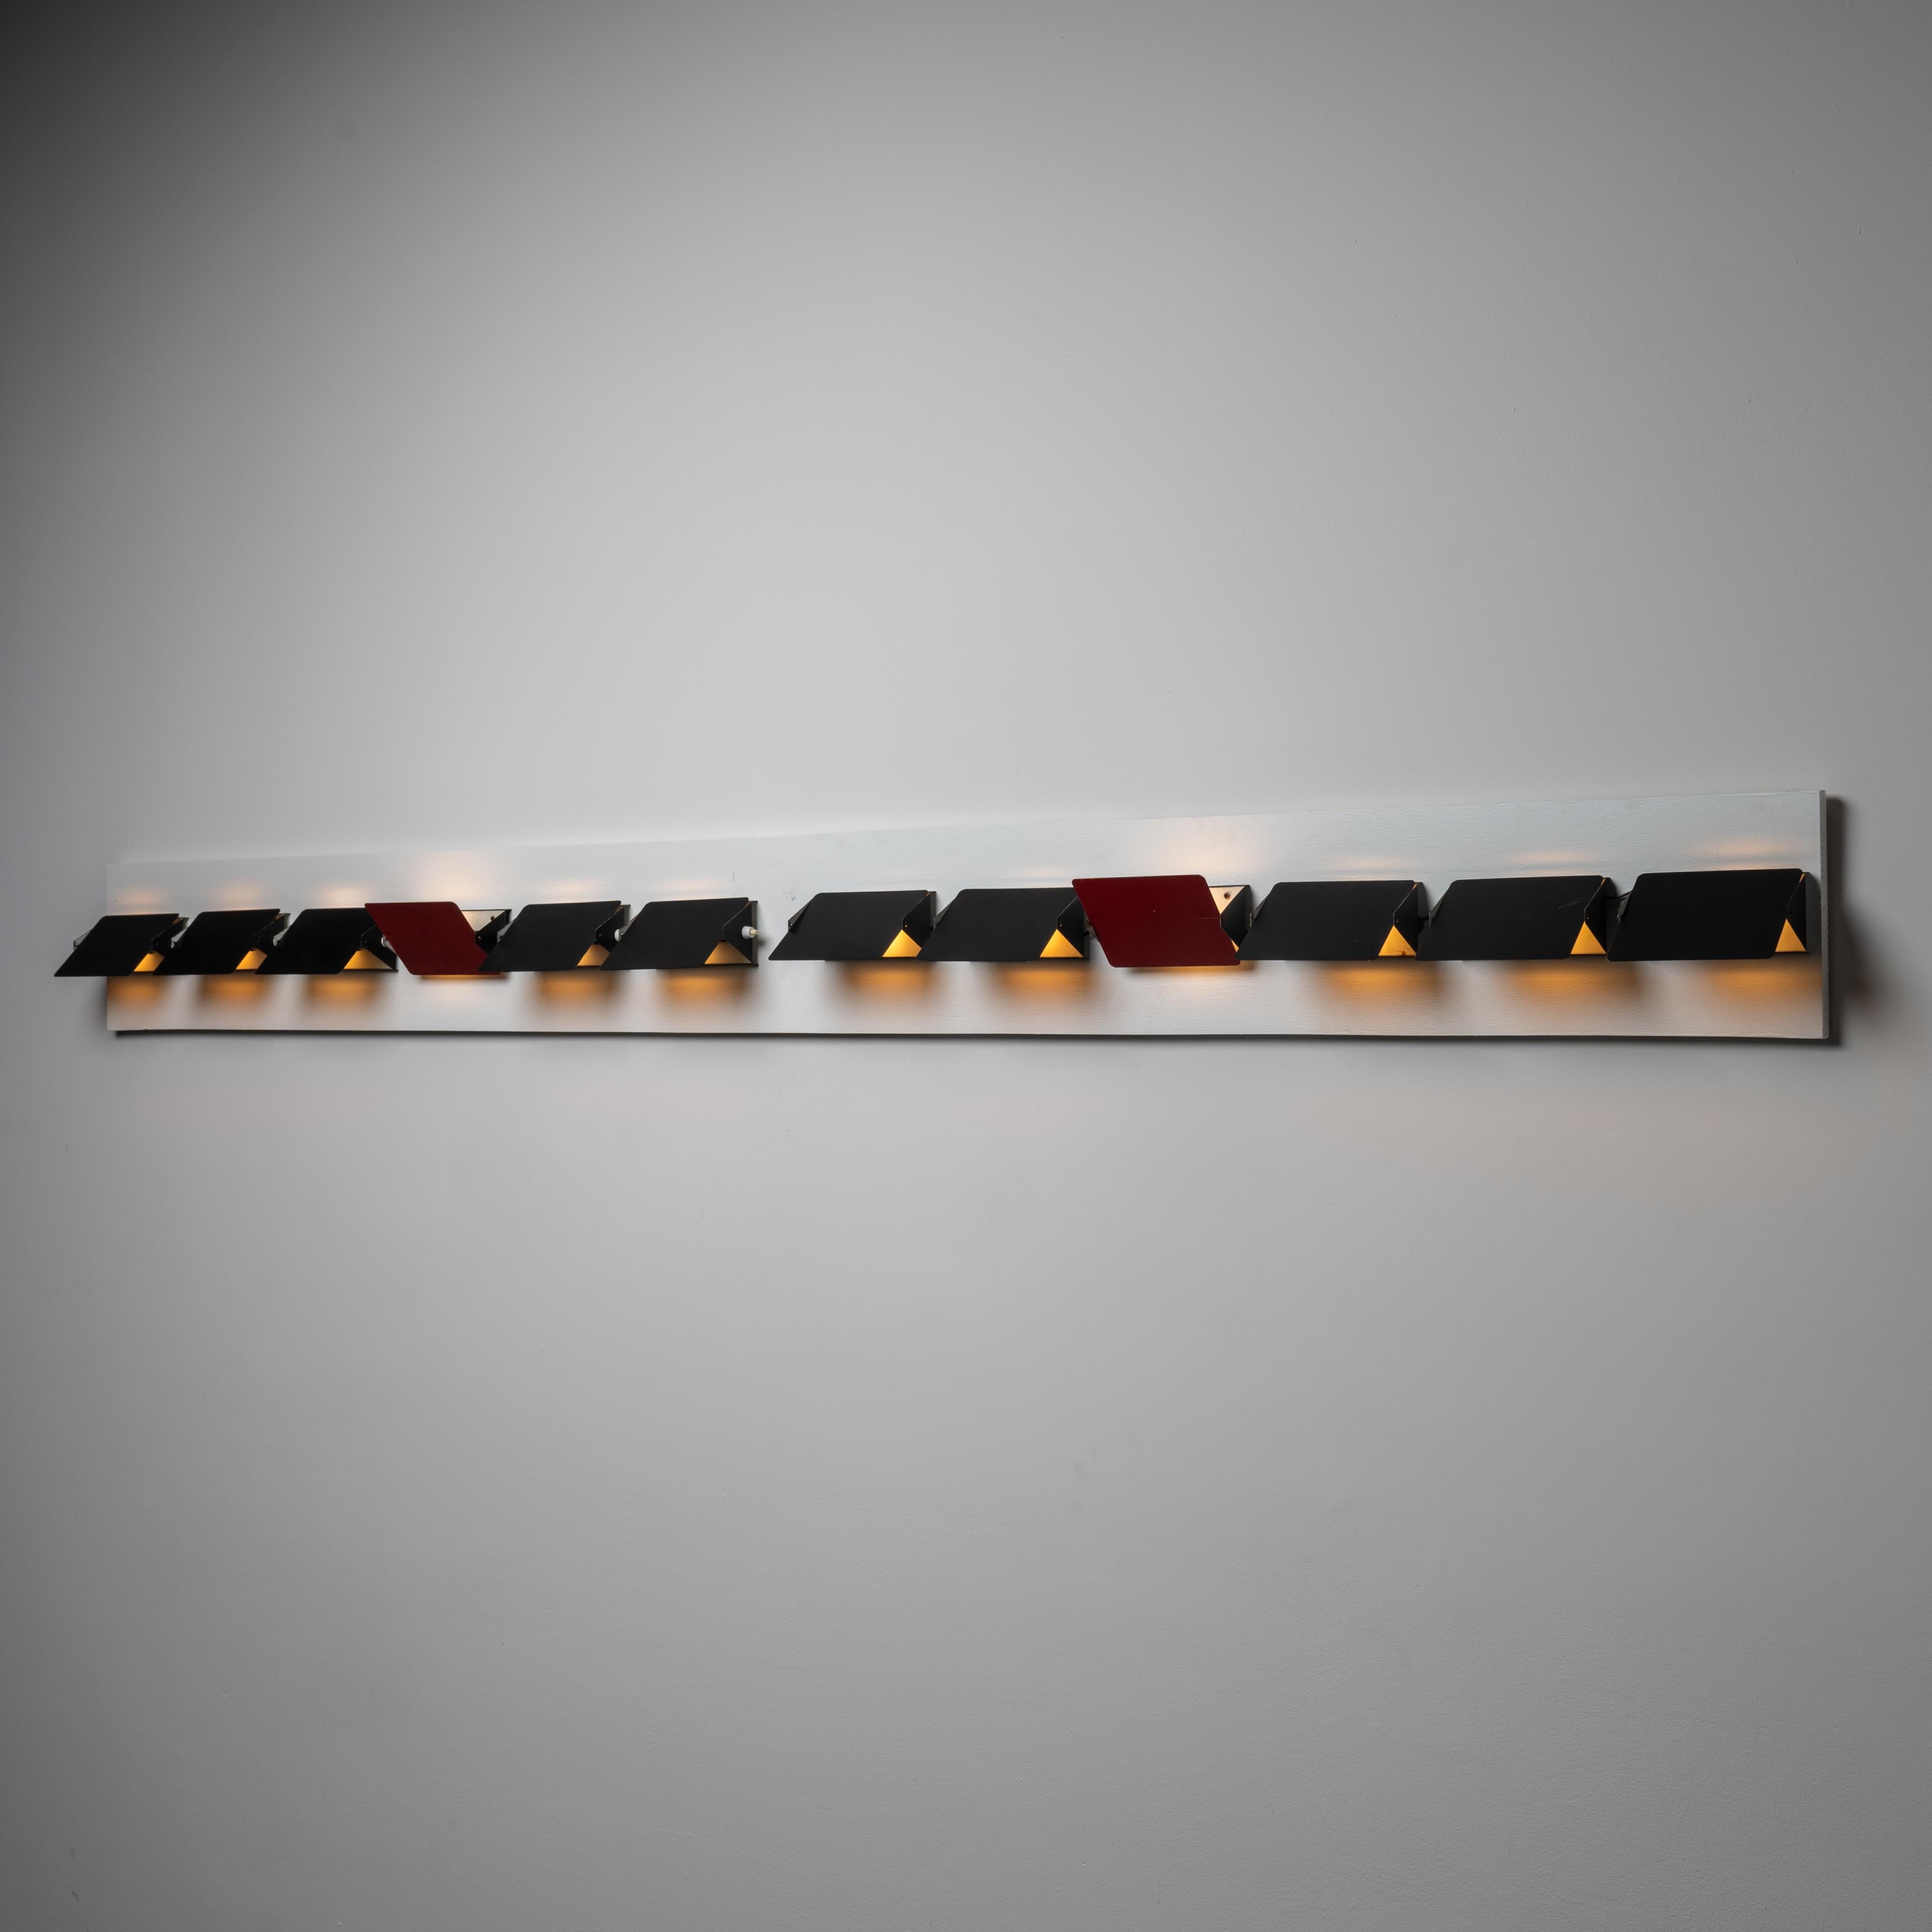 CP1 sconces by Charlotte Perriand. Designed and manufactured in France, circa the 1960s. Enameled aluminum. Rewired for U.S. standards. Adjustable reflectors can be mounted horizontally or vertically. Holds one E14 socket type, adapted for the US.